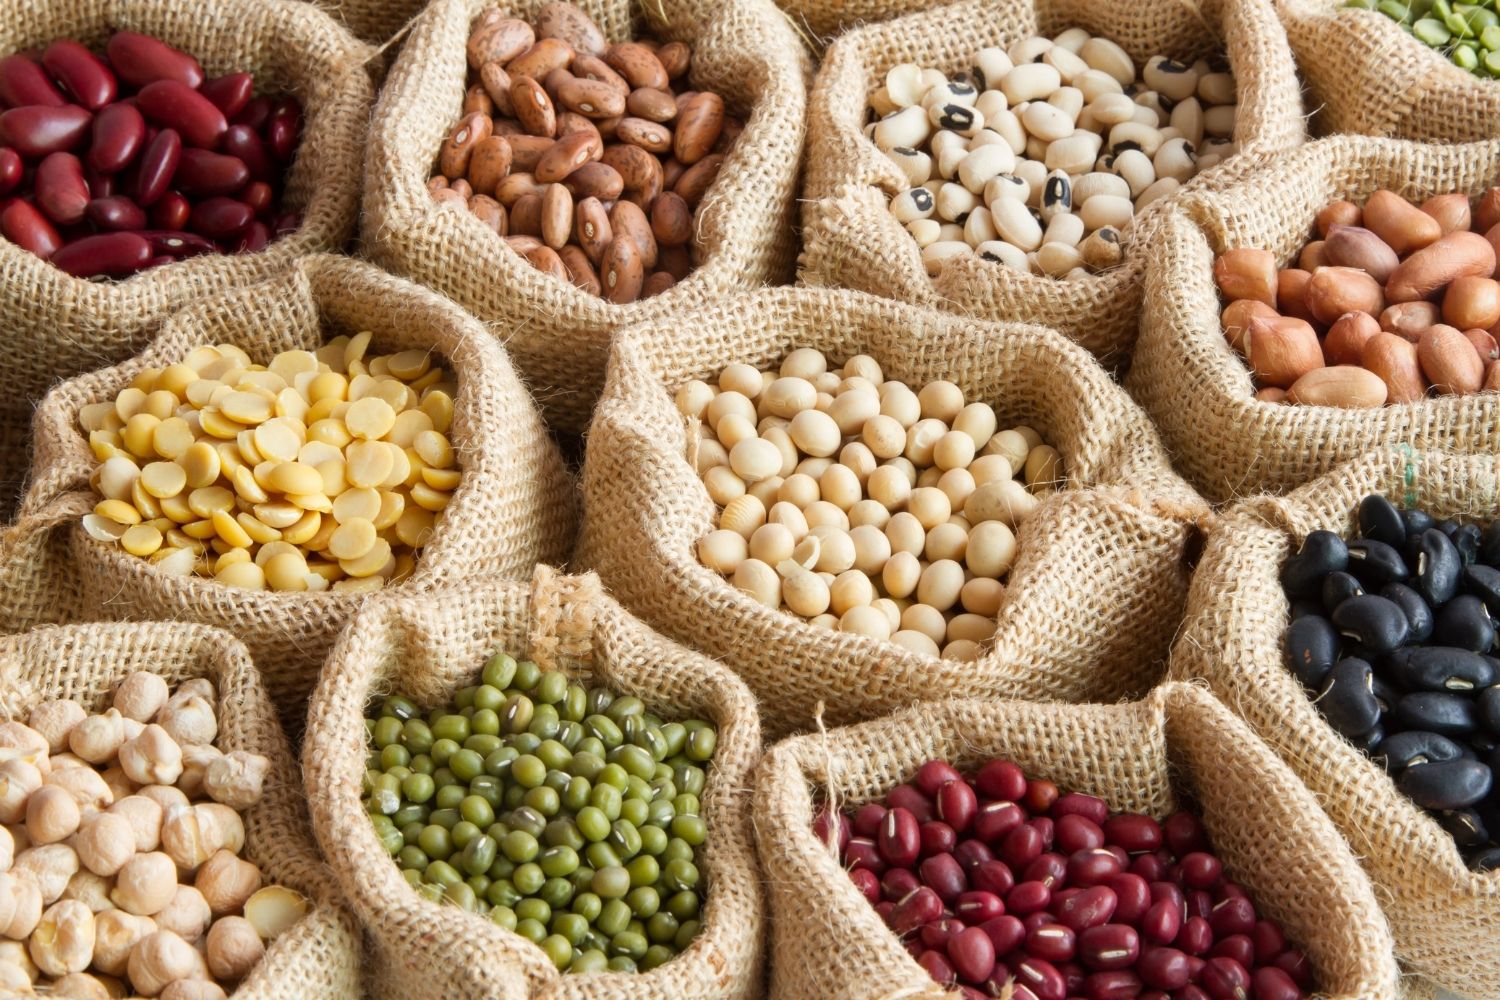 World Pulses / Legumes Day